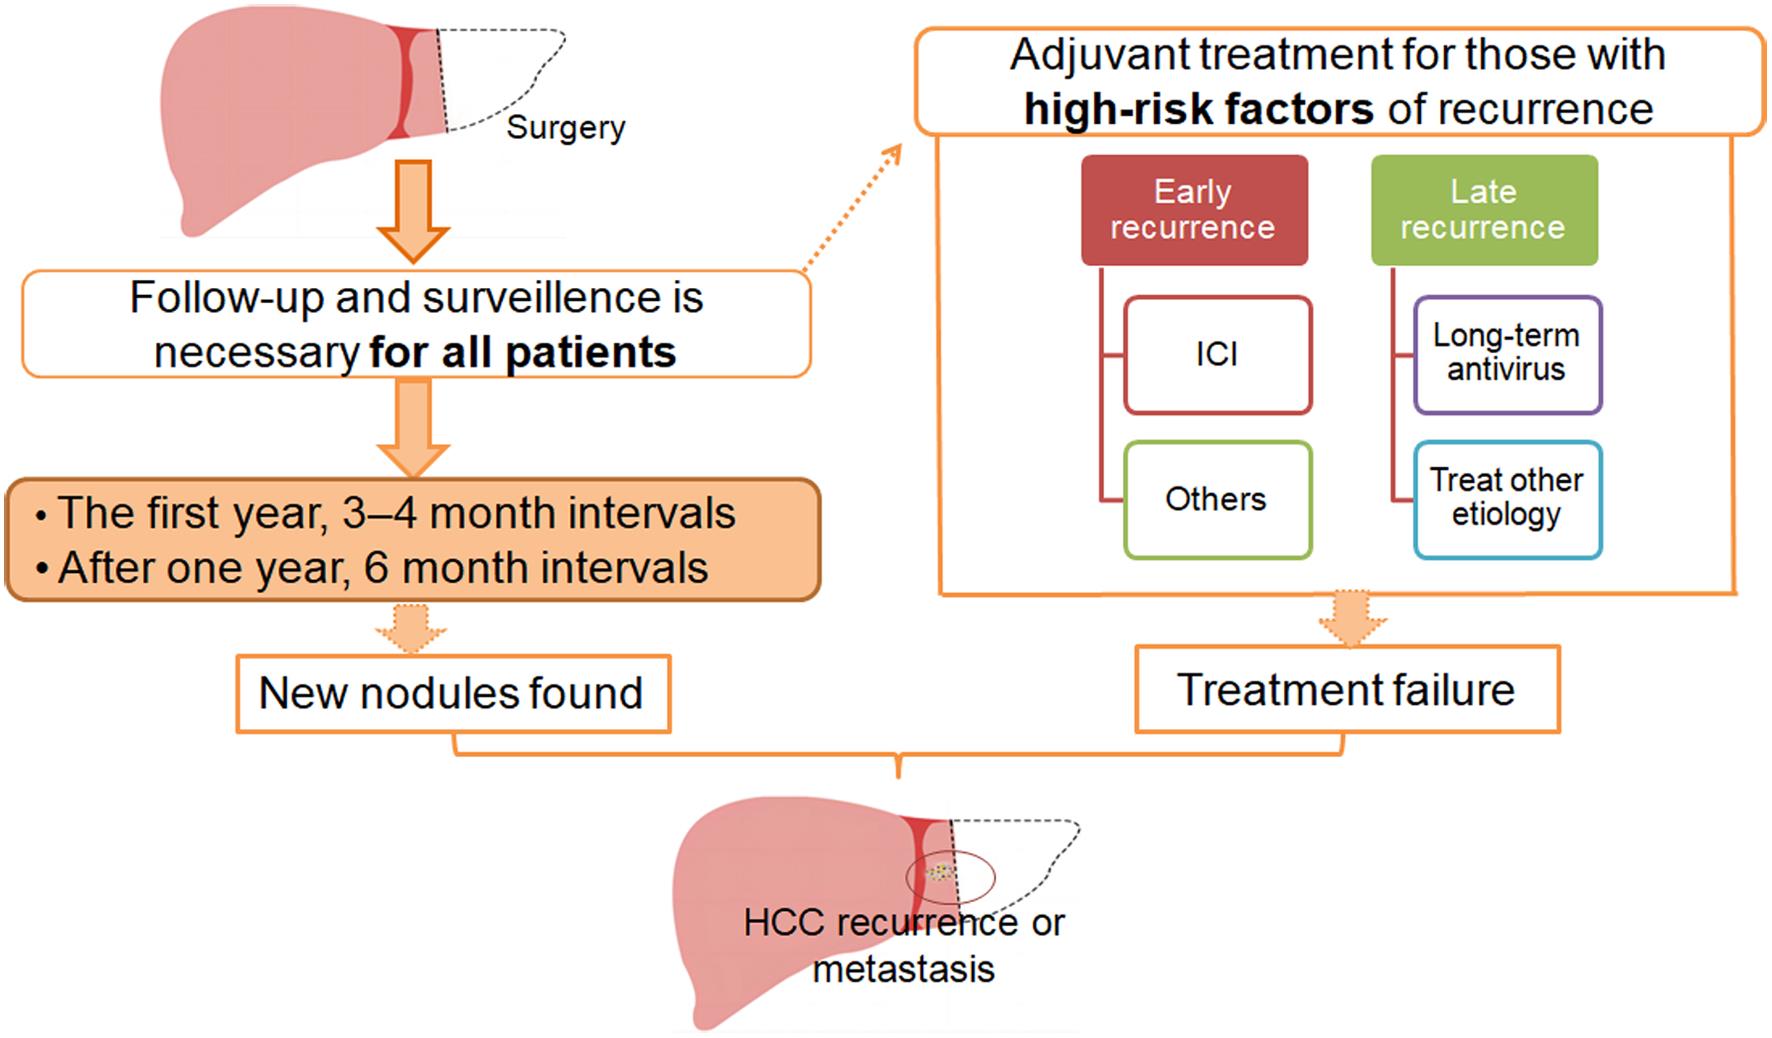 Follow-up and surveillance, recurrent modality, and adjuvant treatment strategy in patients with hepatocellular carcinoma (HCC) after curative hepatectomy or local ablation.